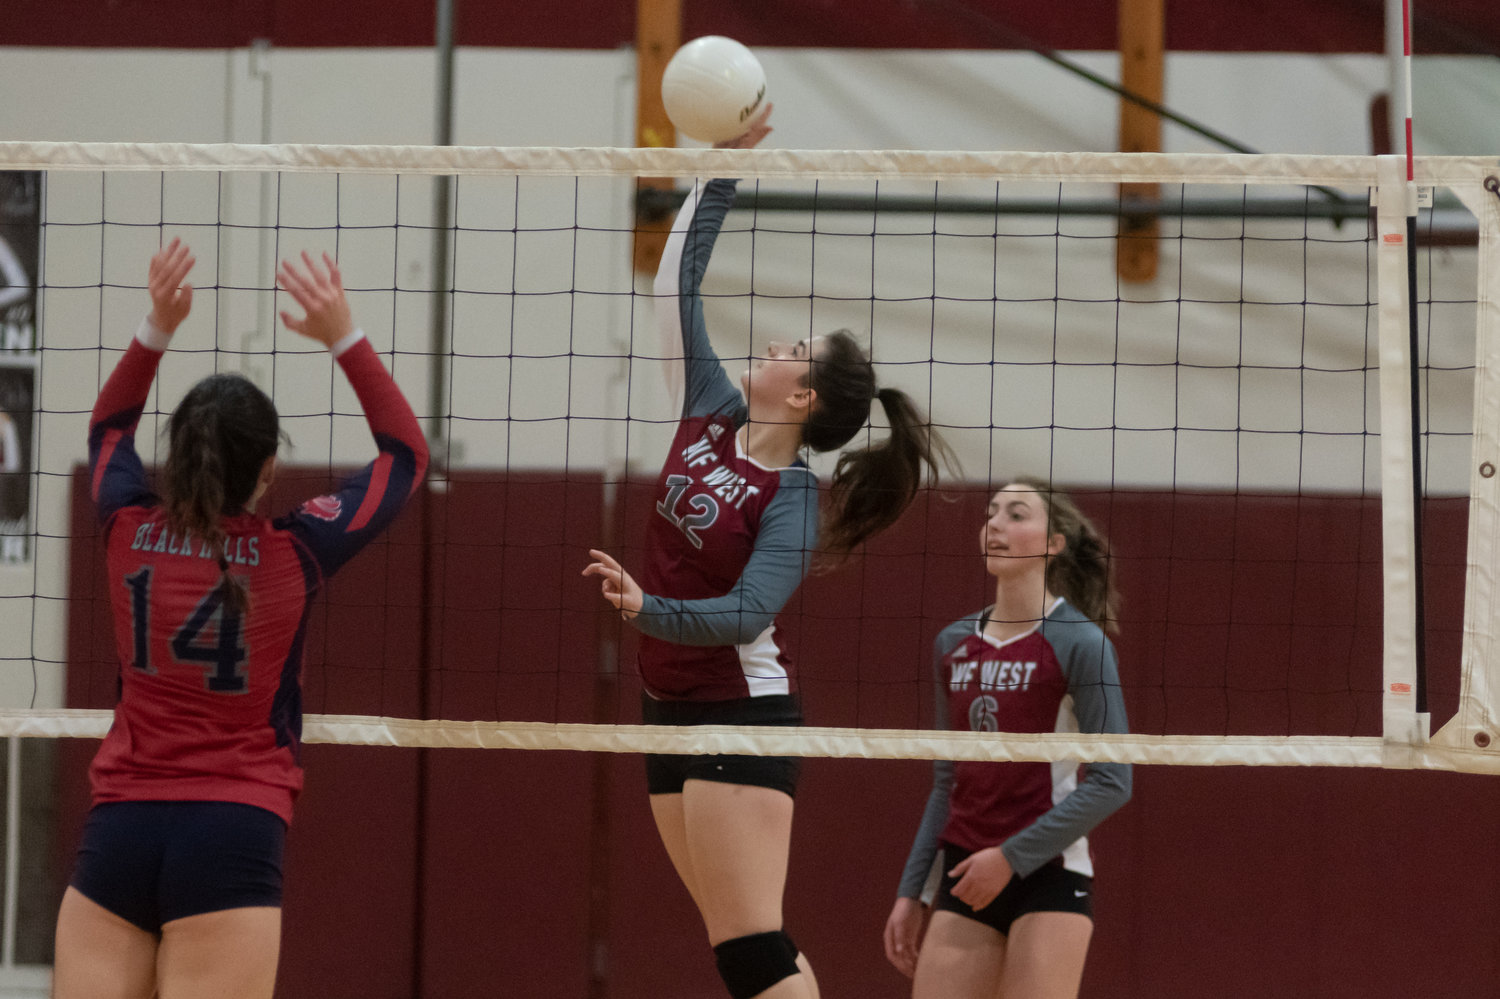 W.F. West senior Maggie Busse hits a spike across the net against Black Hills Oct. 21.